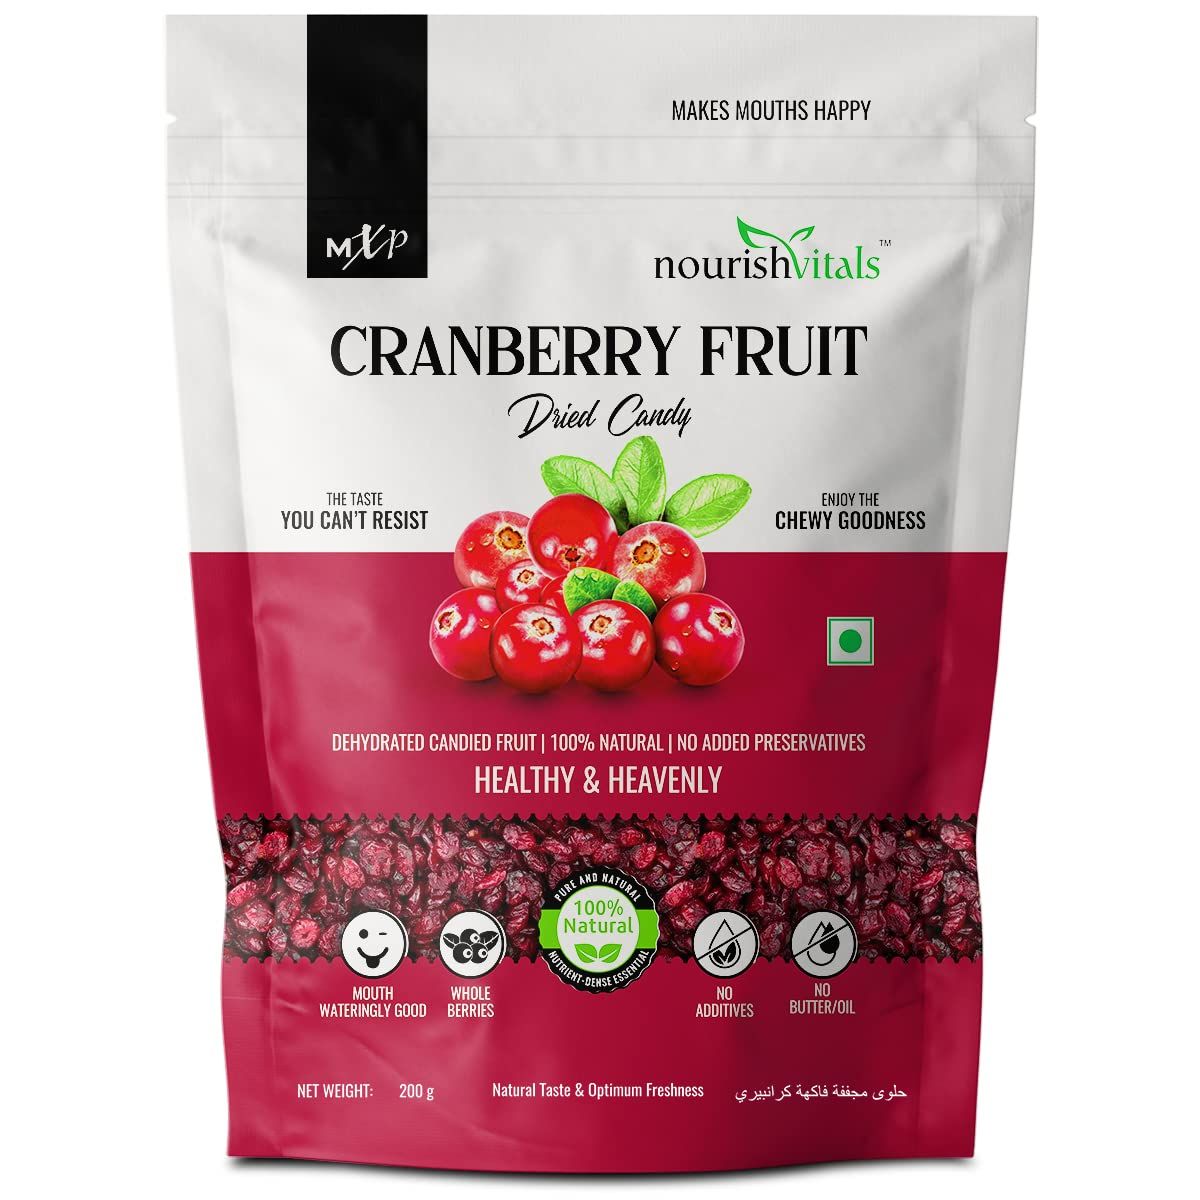 NourishVitals Cranberry Dehydrated Dried Fruit Image